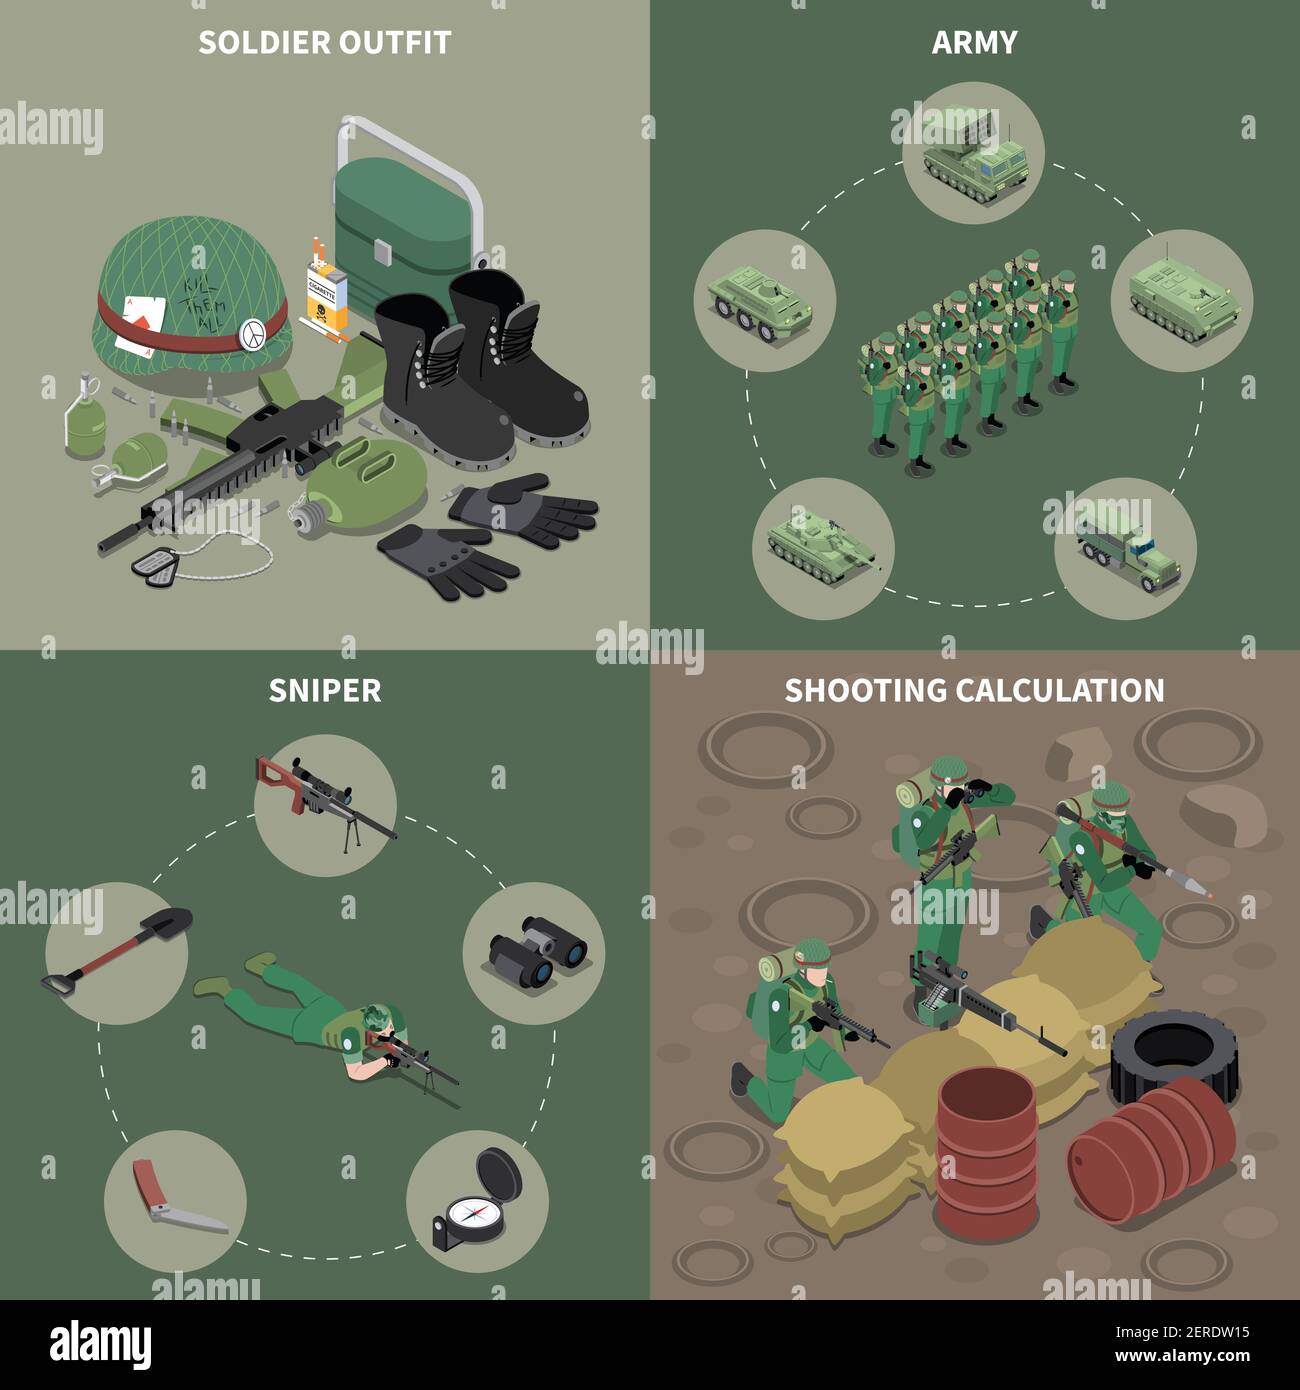 Army 2x2 design concept set of sniper soldier outfit shooting calculation square icons isometric vector illustration Stock Vector